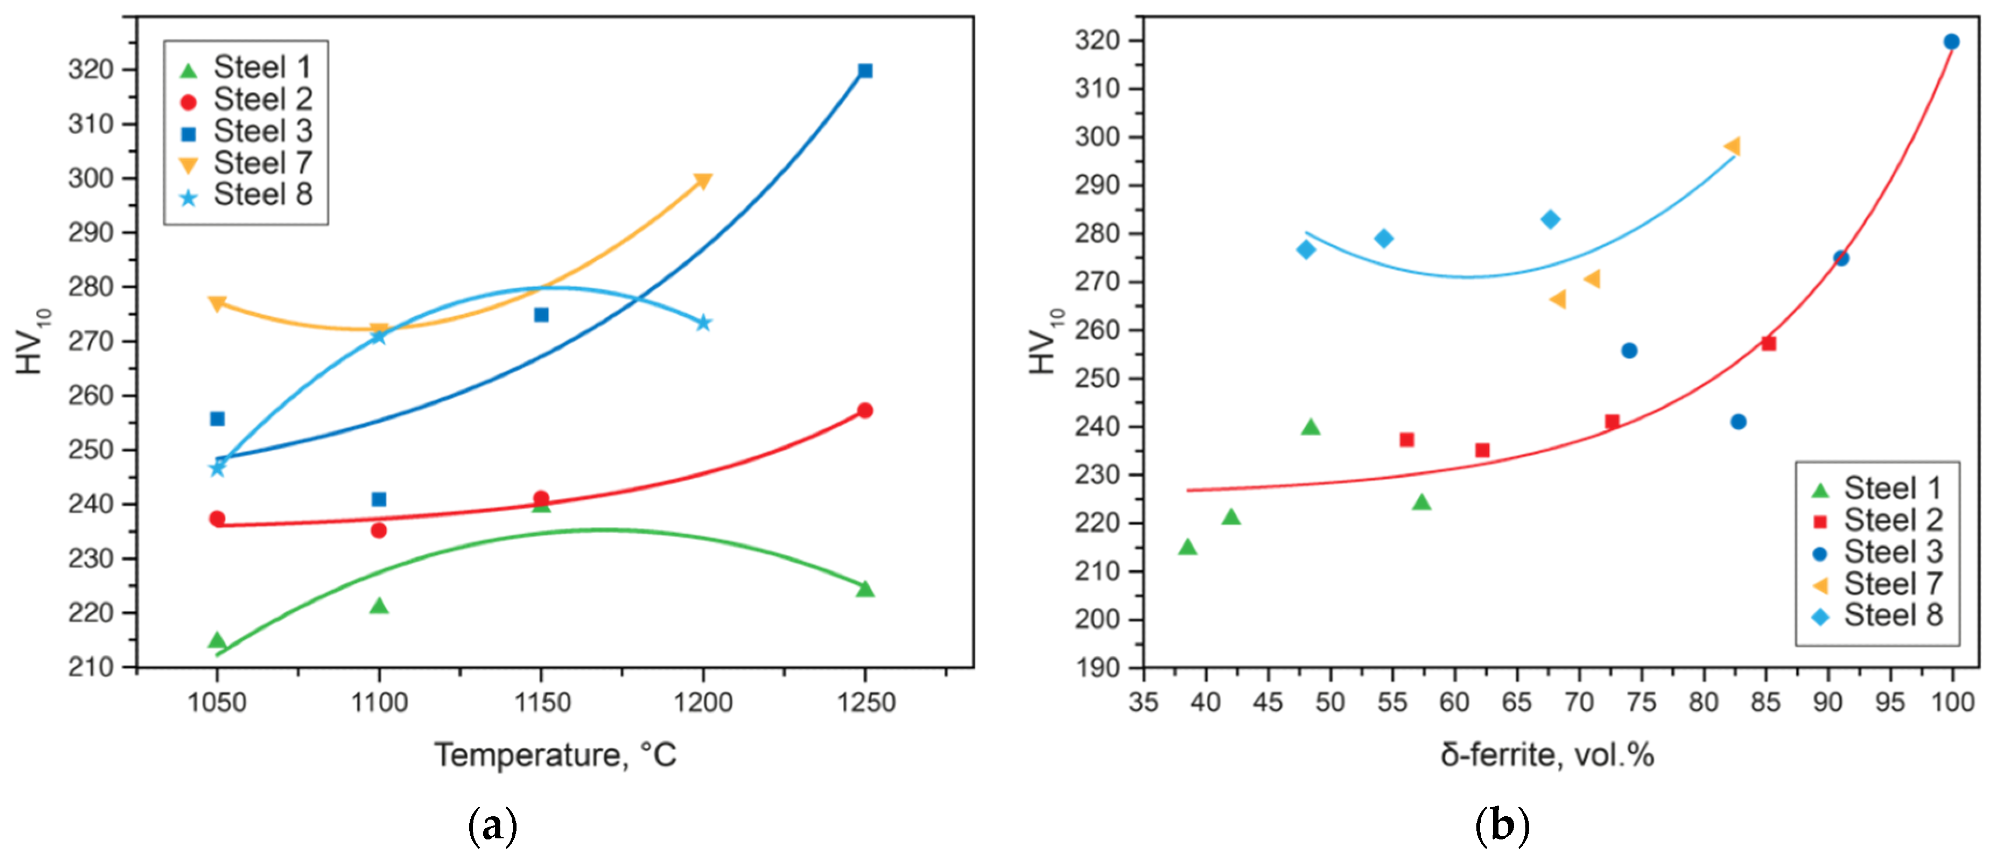 Correlation of hardness (HV) and the quenching temperature (a) and the amount of d-ferrite in the steel microstructure (b).